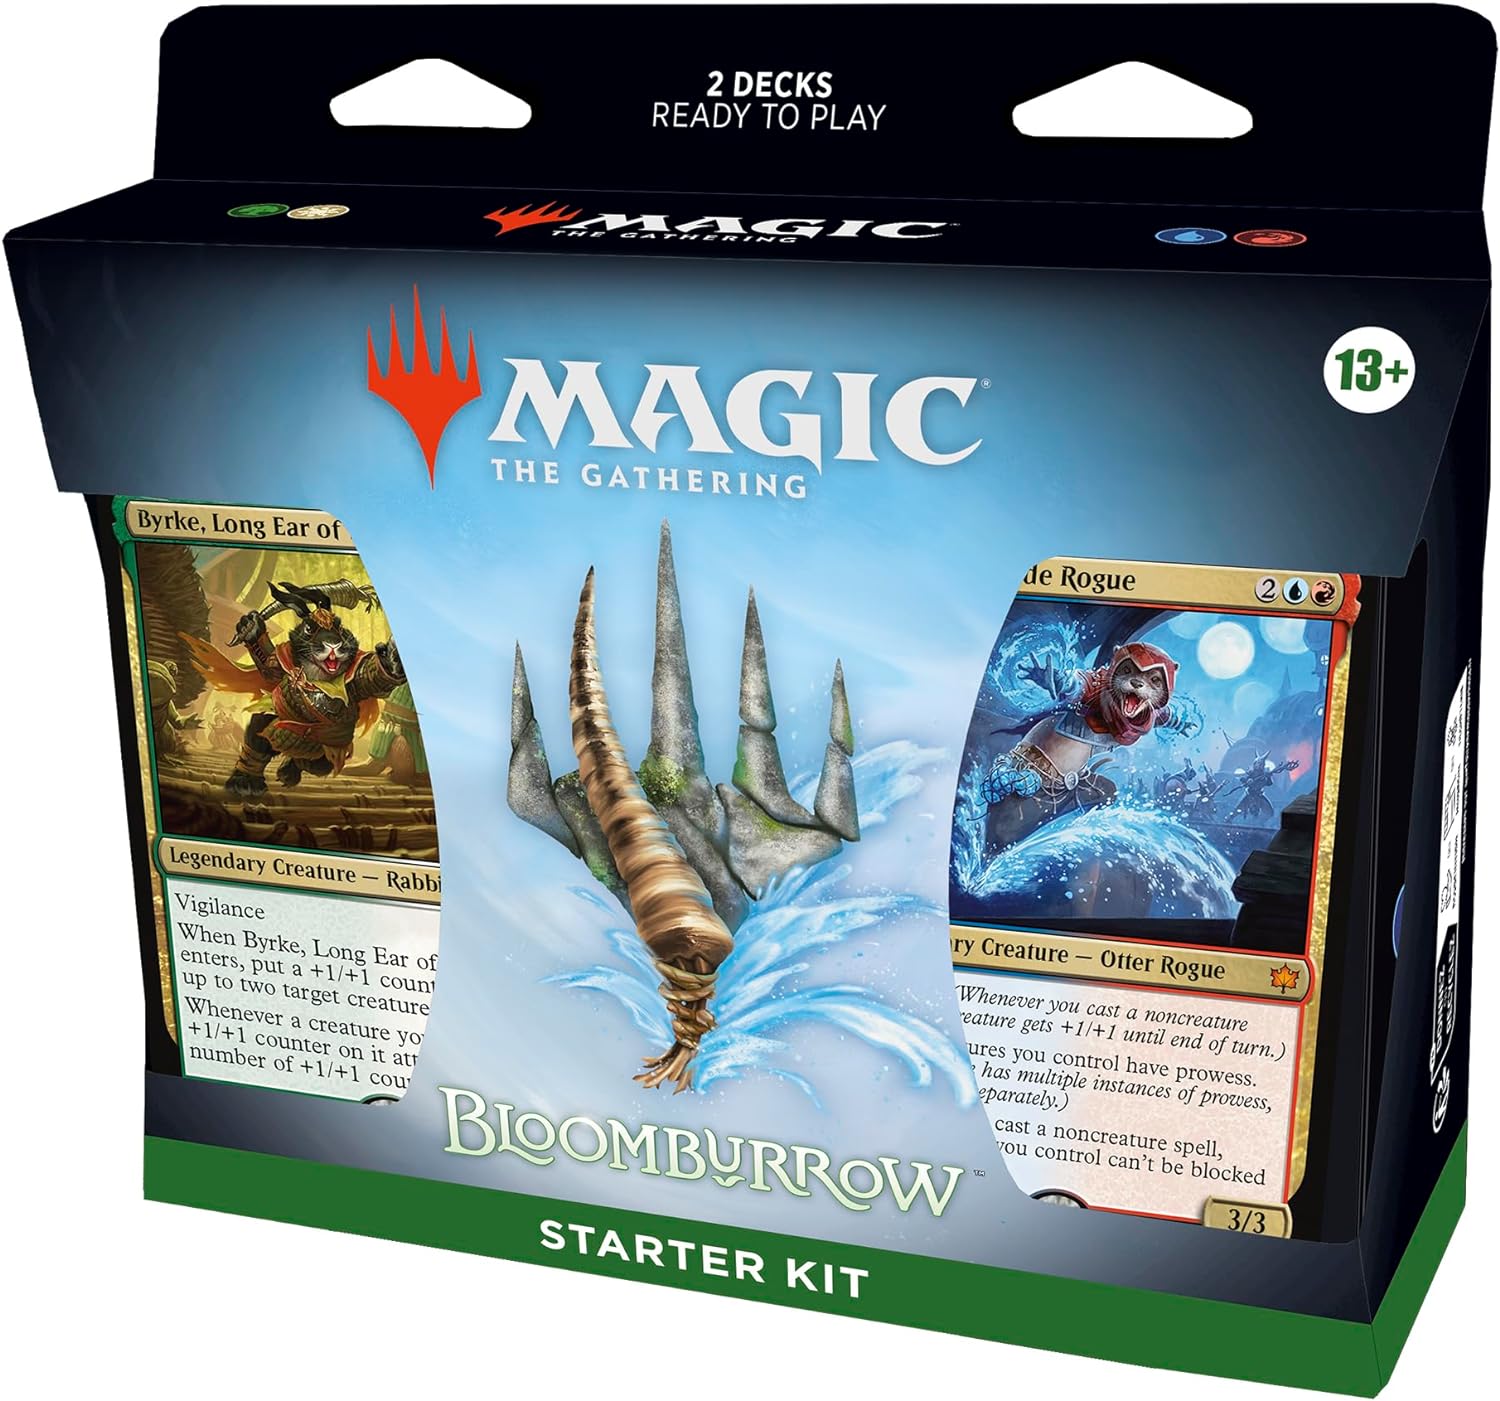 PRE-ORDER: Bloomburrow Starter Kit | Learn to Play Magic with 2 Bloomburrow-Themed Decks | 2 Player Collectible Card Game. Magic: The Gathering, Trading Cards made by Magic The Gathering. Exit 23 Games 